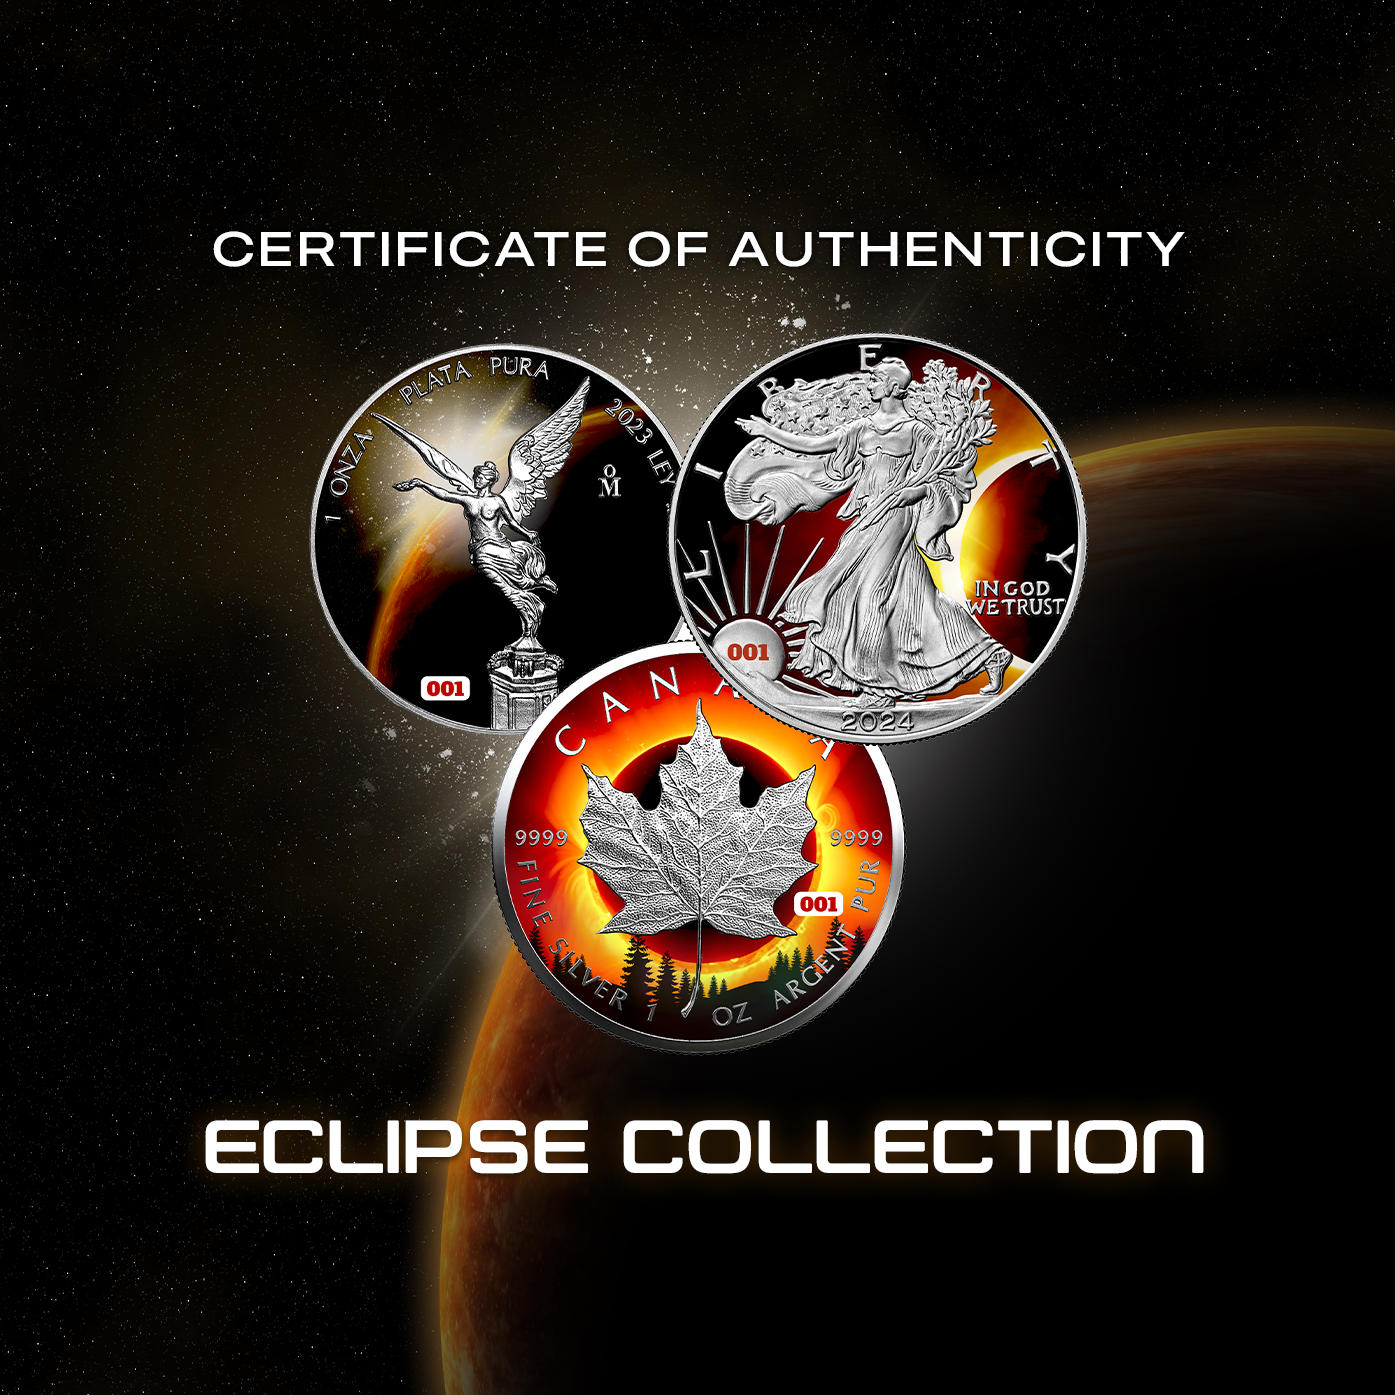 Chromatics Total Eclipse 3 pc Silver Limited Edition Set - 1 of 408